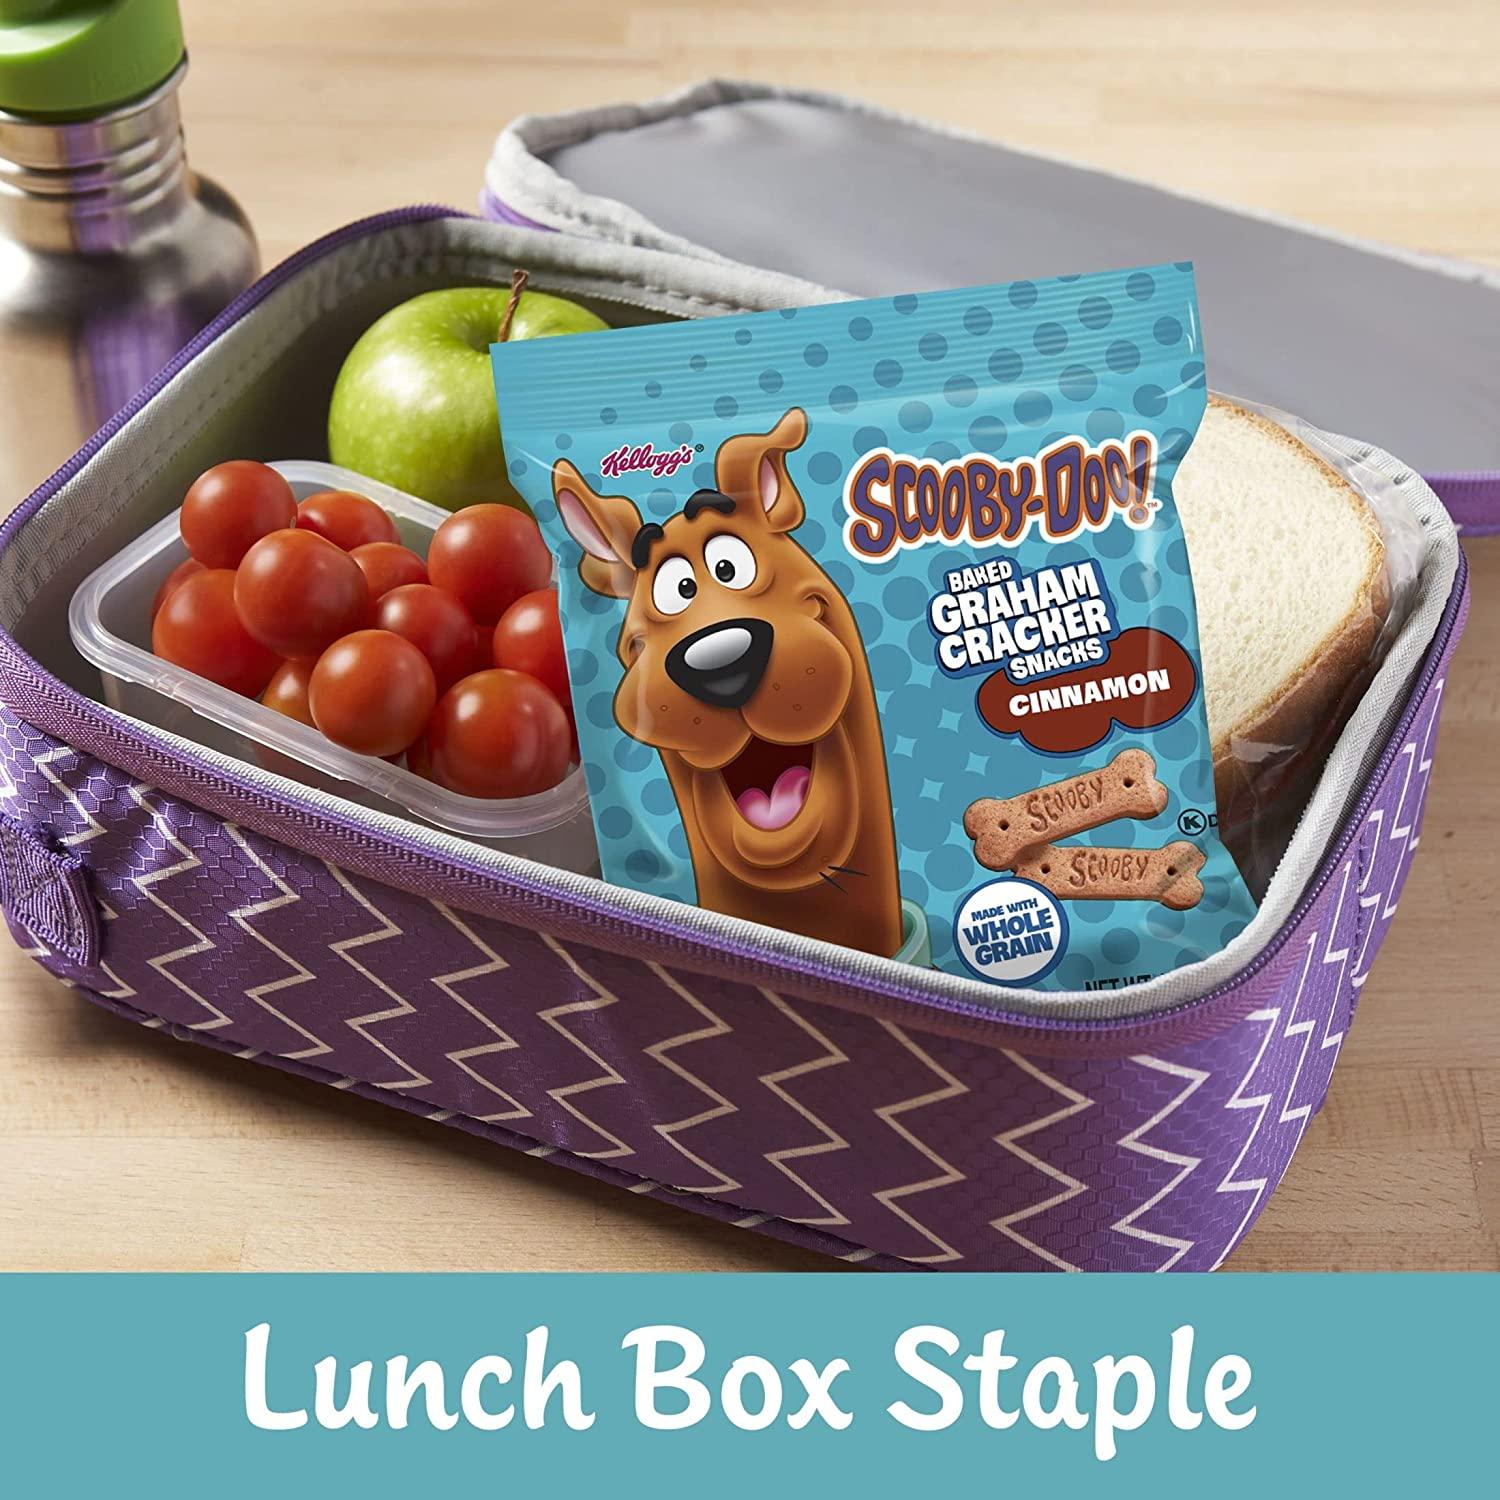 Kellogg's SCOOBY-DOO! Baked Graham Cracker Snacks, Made with Whole Grains,  Kids Lunch Snacks, Cinnamon, 12oz Box (12 Pouches)